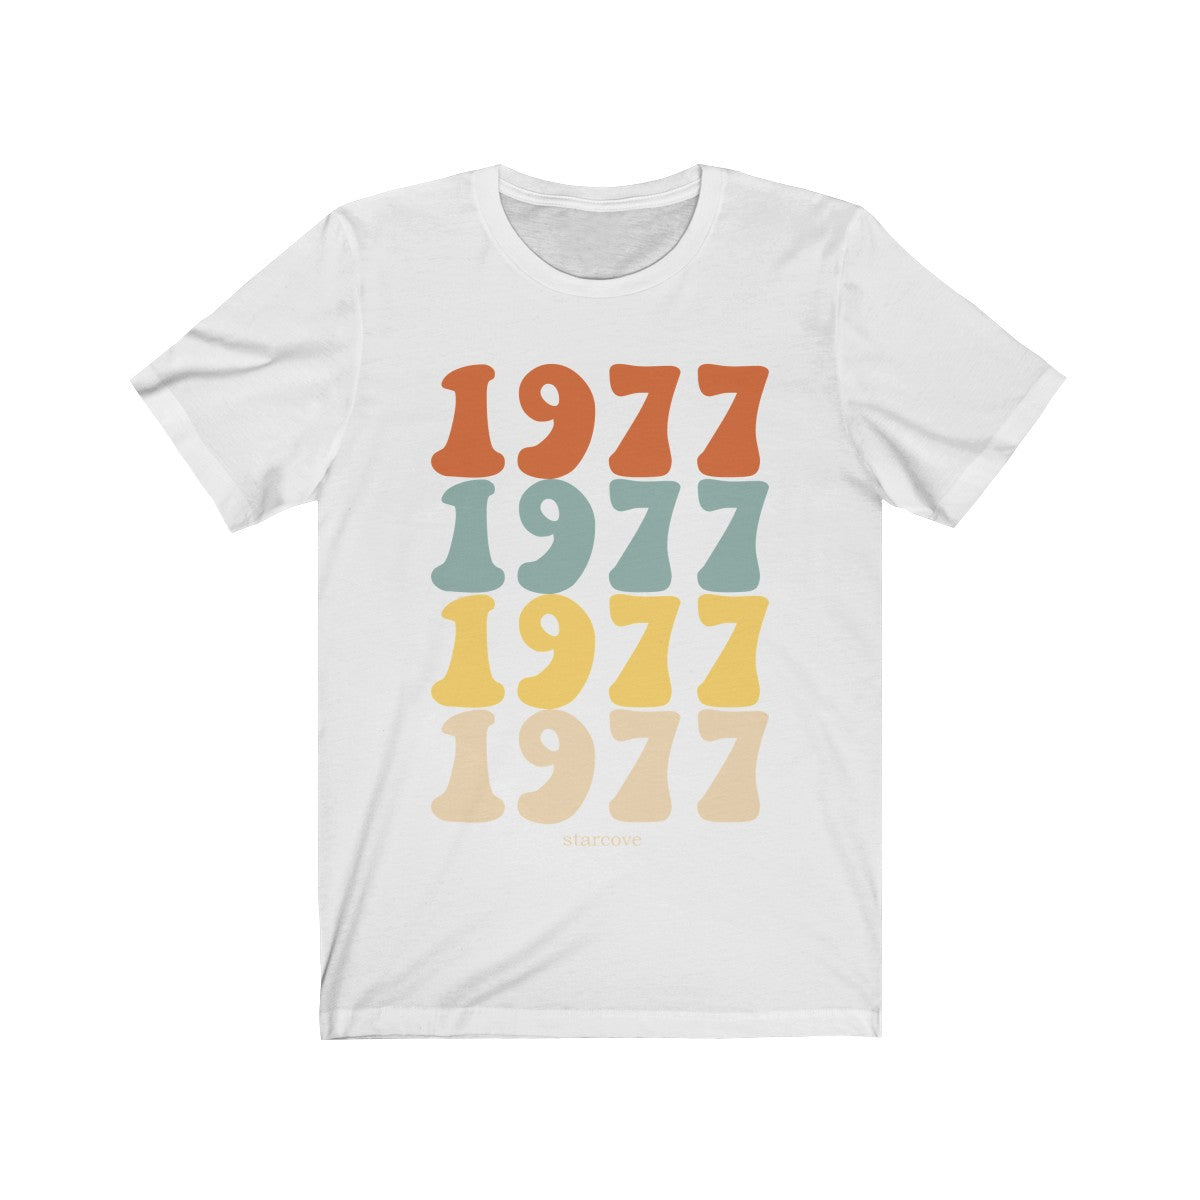 1977 shirt, 44th Birthday Party Turning 44 Years Old, 70s Retro Vintage gift Idea Women Men, Born Made in 1977 Funny Mom Dad Present TShirt Starcove Fashion